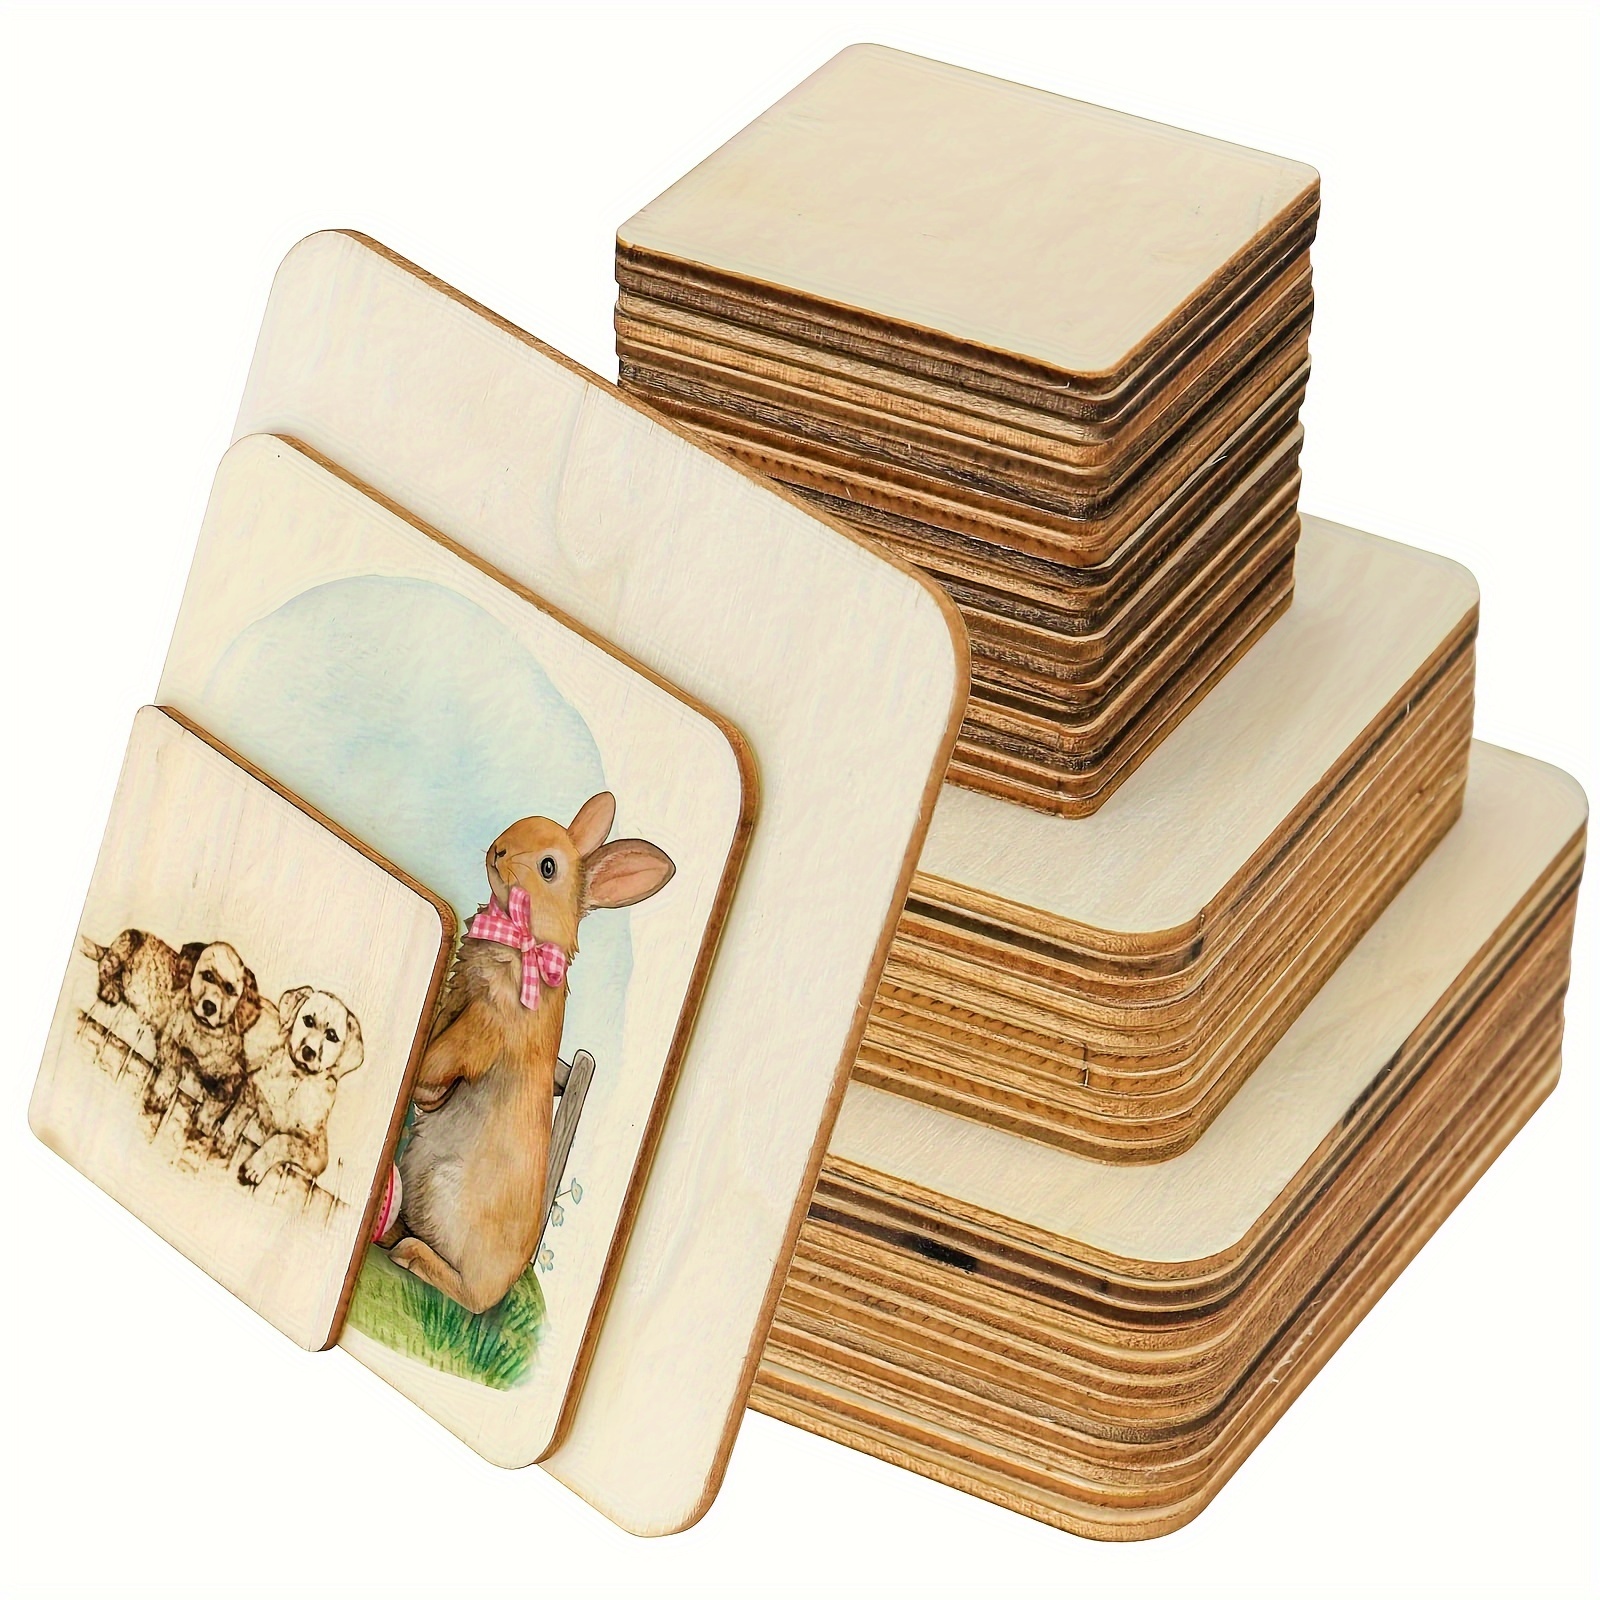 Wooden Unfinished Coasters 4 x 4 Inch, Bag of 25 Unfinished Blank Wooden  Square Cutouts, Rounded Corners, Perfect for DIY and Craft Projects by